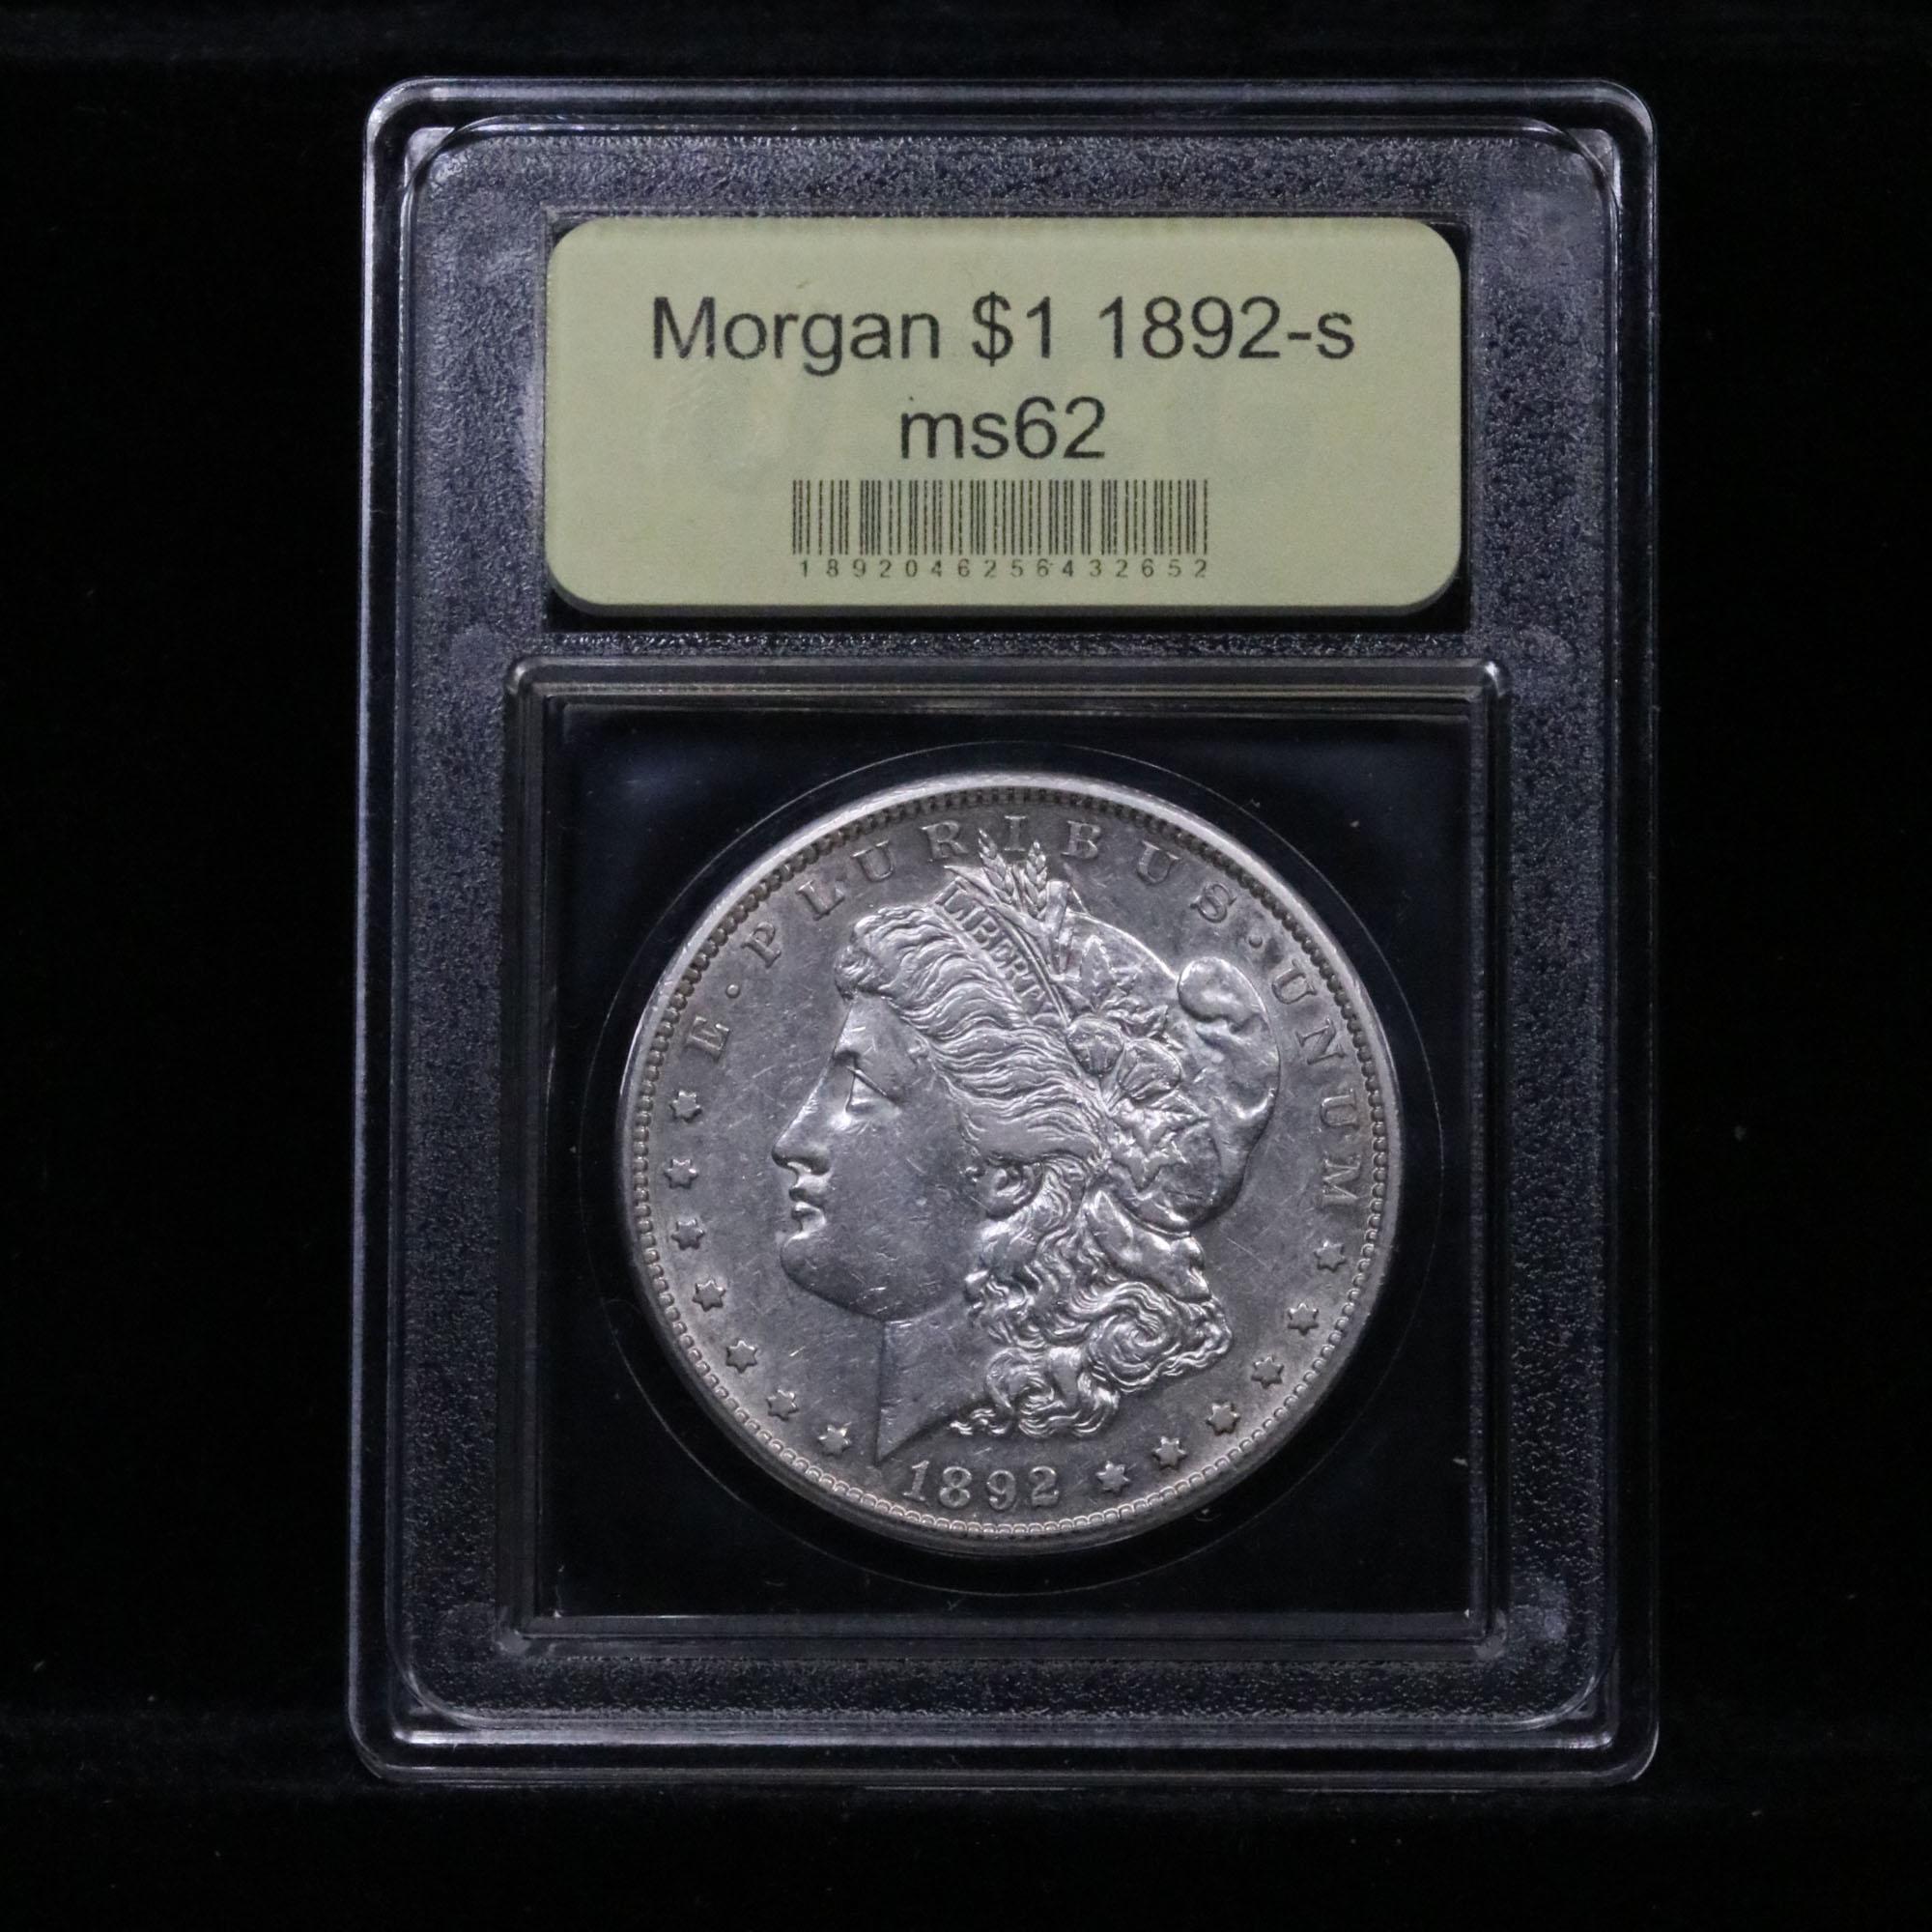 ***Auction Highlight*** 1892-s Morgan Dollar $1 Graded Select Unc by USCG (fc)